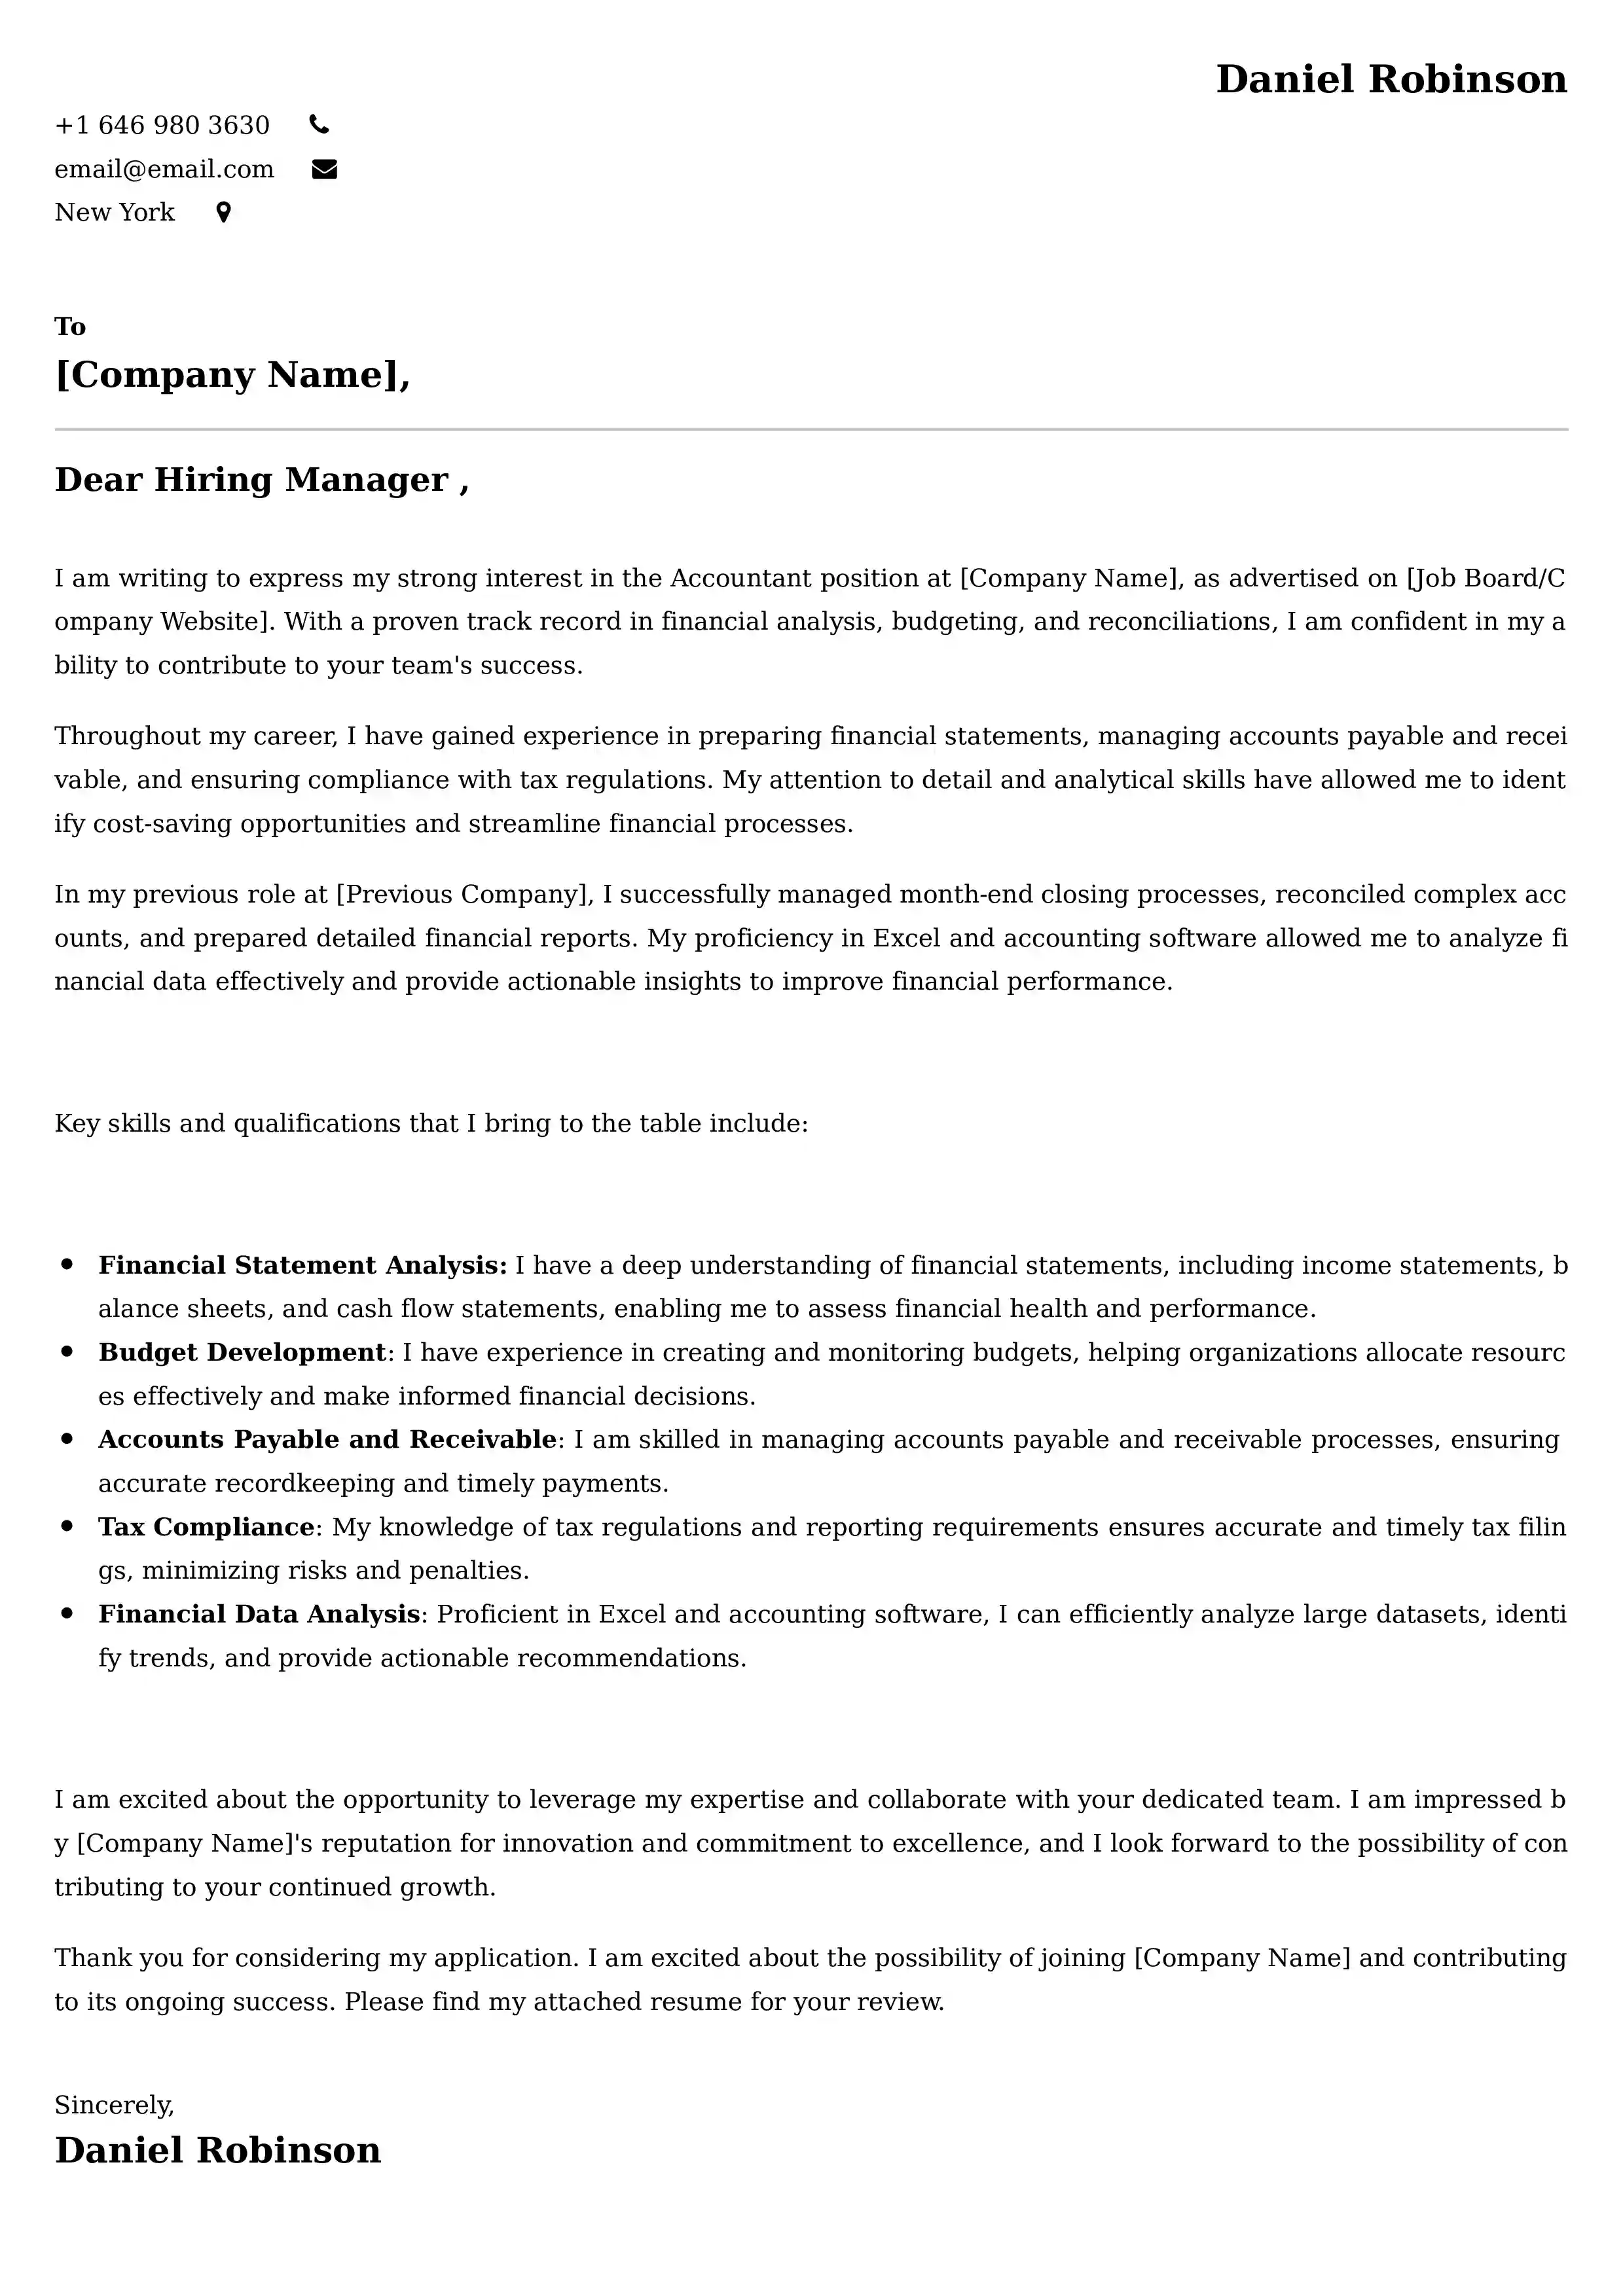 Accountant Cover Letter Examples -Latest Brazilian Templates